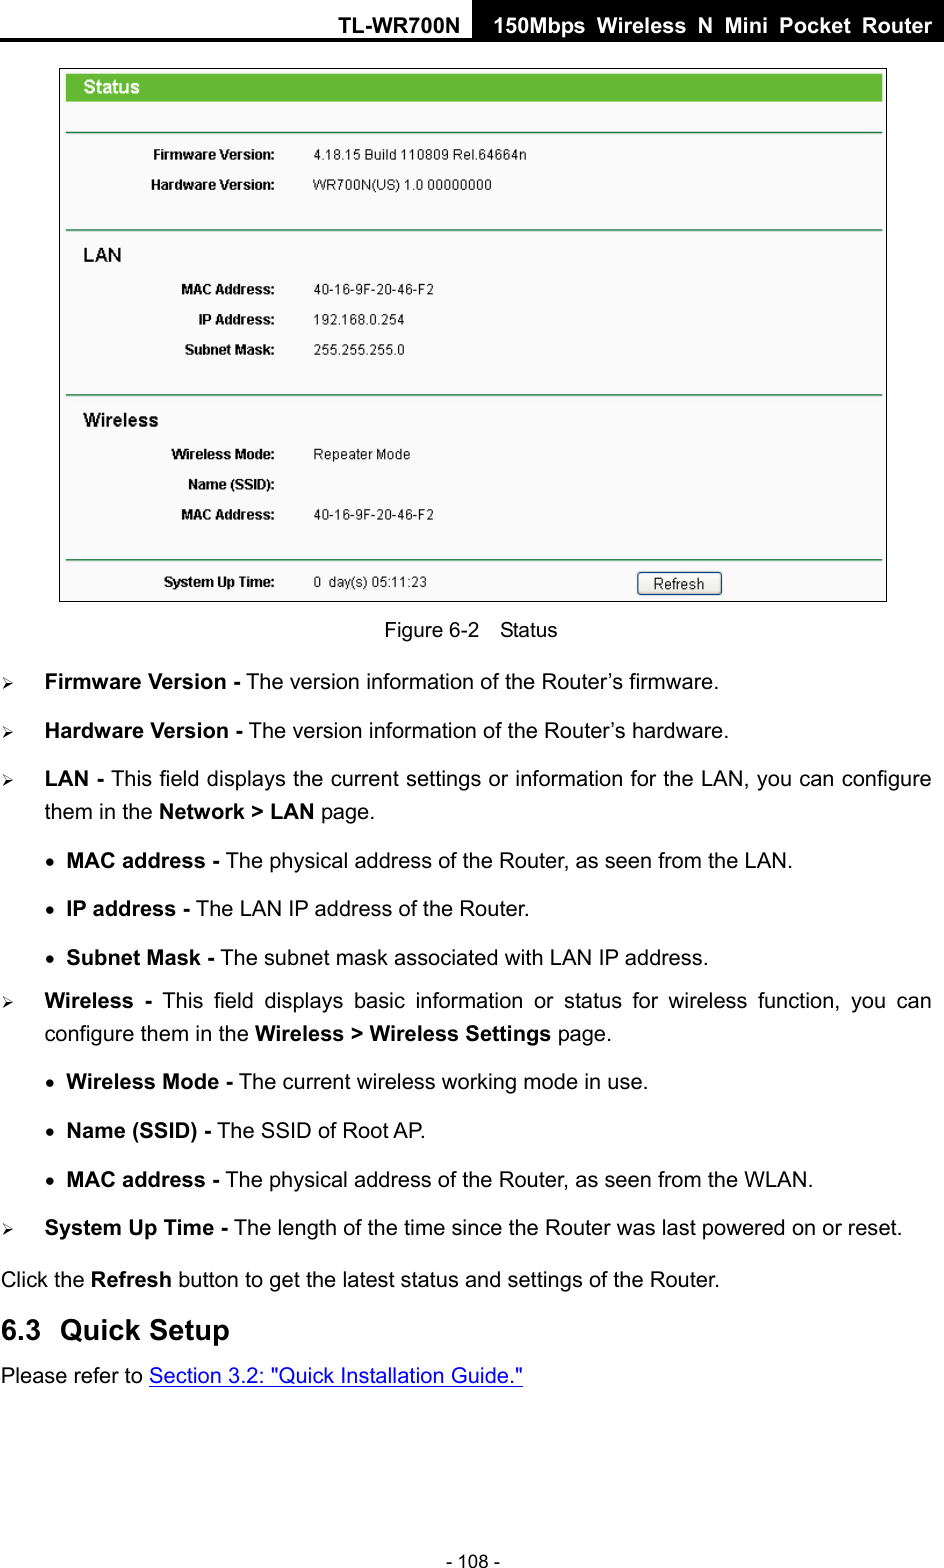 TL-WR700N 150Mbps Wireless N Mini Pocket Router - 108 -  Figure 6-2    Status ¾ Firmware Version - The version information of the Router’s firmware. ¾ Hardware Version - The version information of the Router’s hardware. ¾ LAN - This field displays the current settings or information for the LAN, you can configure them in the Network &gt; LAN page.   • MAC address - The physical address of the Router, as seen from the LAN. • IP address - The LAN IP address of the Router. • Subnet Mask - The subnet mask associated with LAN IP address. ¾ Wireless -  This field displays basic information or status for wireless function, you can configure them in the Wireless &gt; Wireless Settings page.   • Wireless Mode - The current wireless working mode in use. • Name (SSID) - The SSID of Root AP. • MAC address - The physical address of the Router, as seen from the WLAN. ¾ System Up Time - The length of the time since the Router was last powered on or reset. Click the Refresh button to get the latest status and settings of the Router. 6.3  Quick Setup Please refer to Section 3.2: &quot;Quick Installation Guide.&quot; 